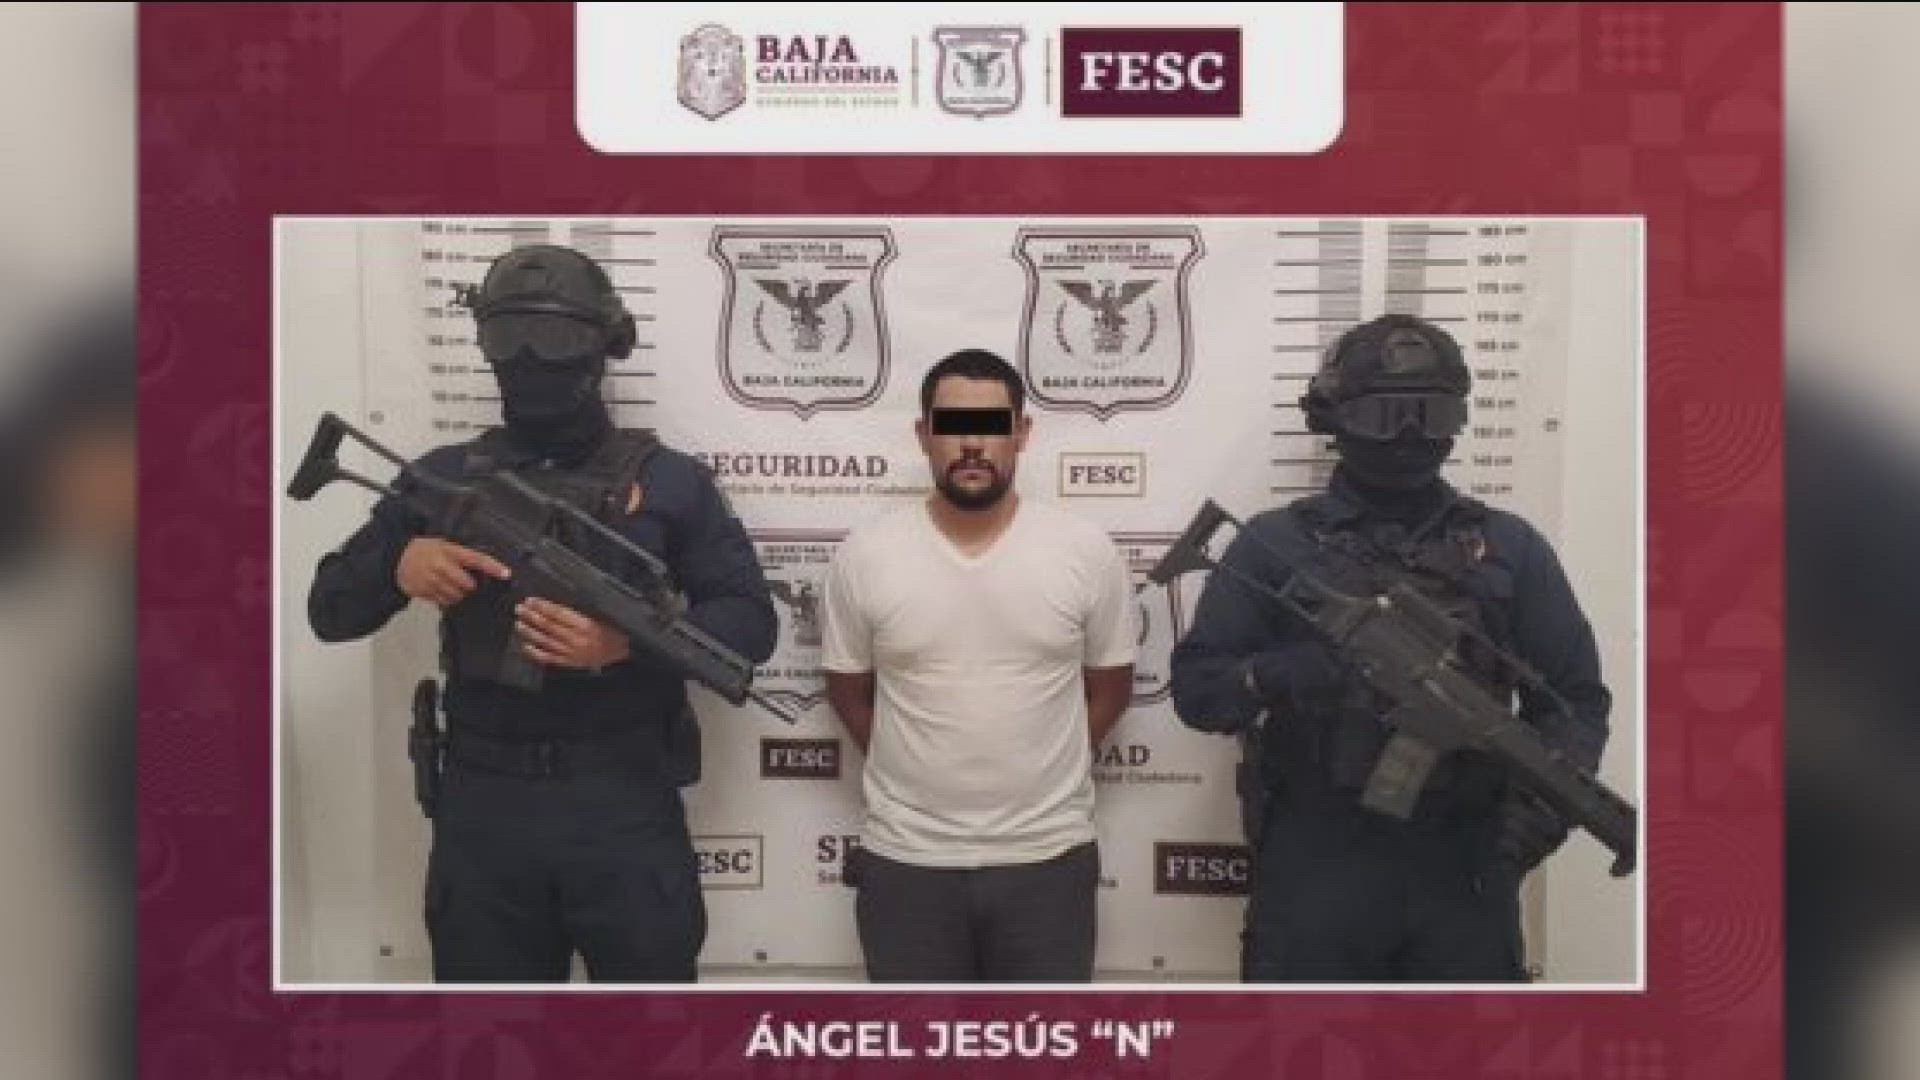 The man was captured by officers on Monday in Santo Tomás, south of Ensenada.